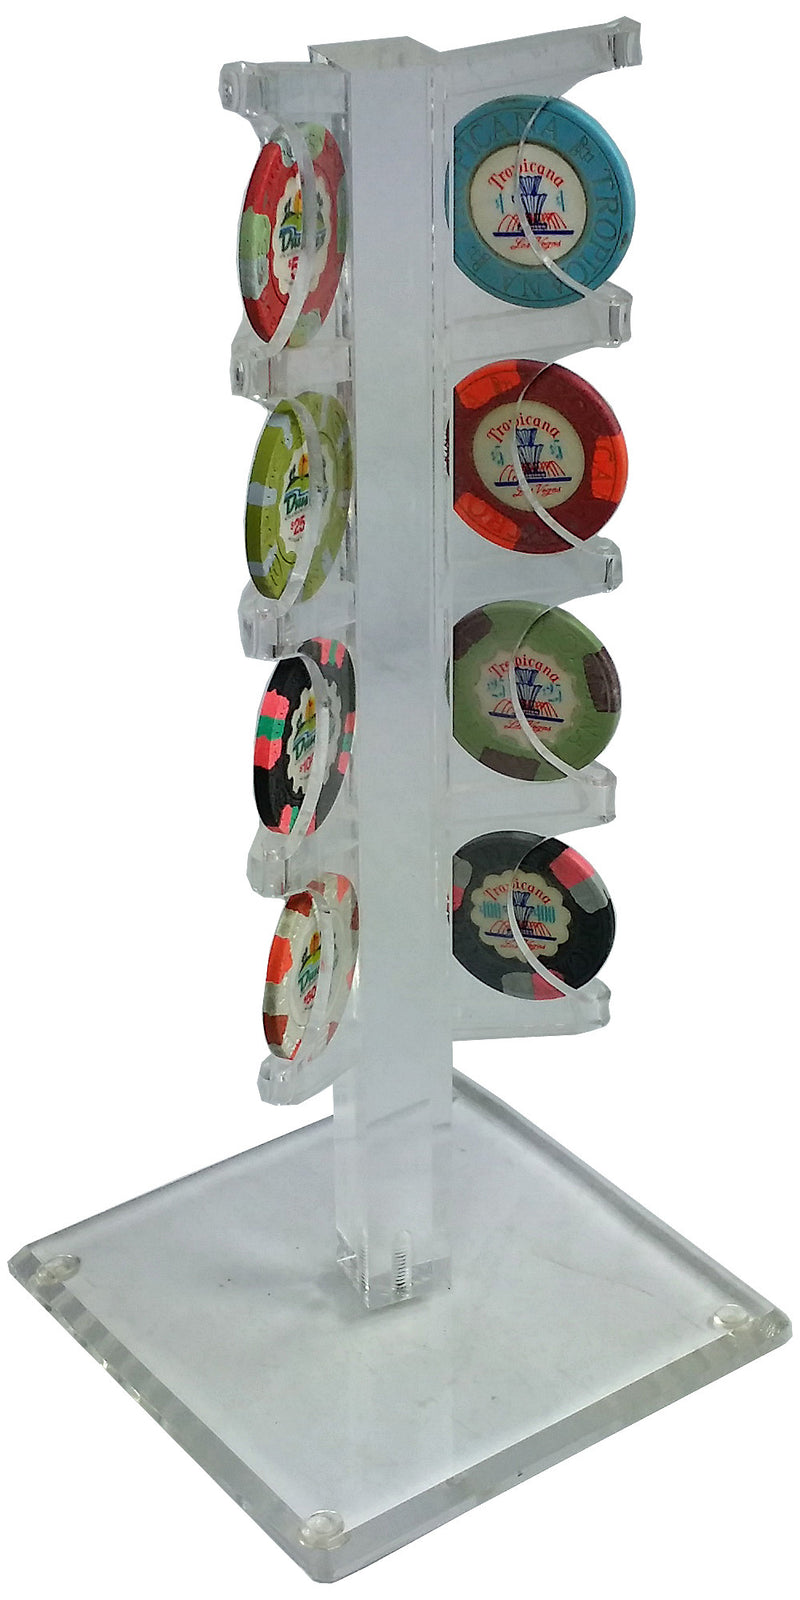 Chip Display Acrylic Tree for 8 Poker Chips - Spinettis Gaming - 2